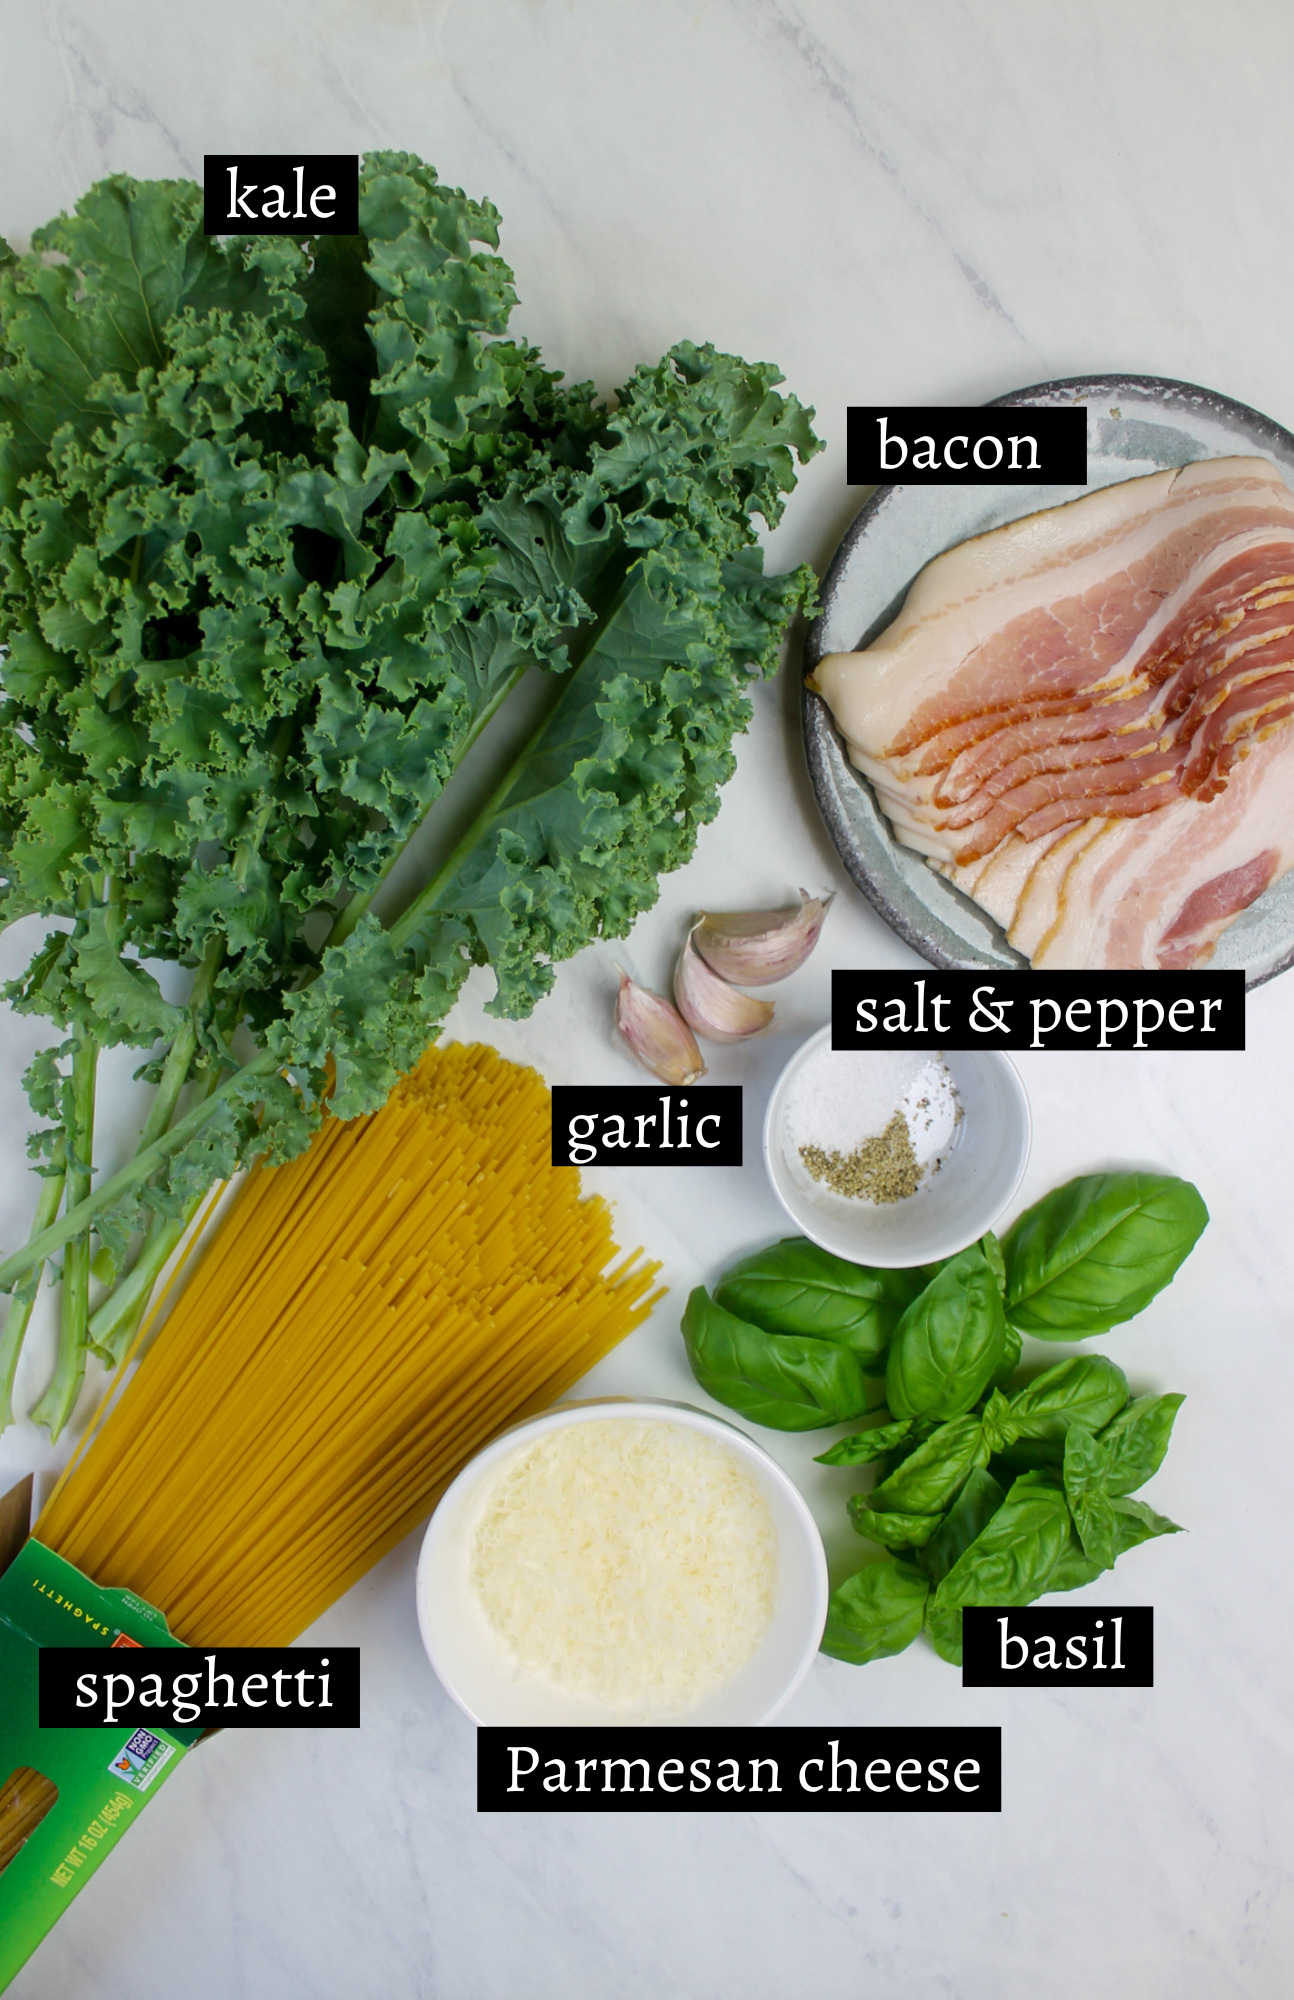 Labeled ingredients for bacon kale spaghetti with Parmesan cheese and basil.